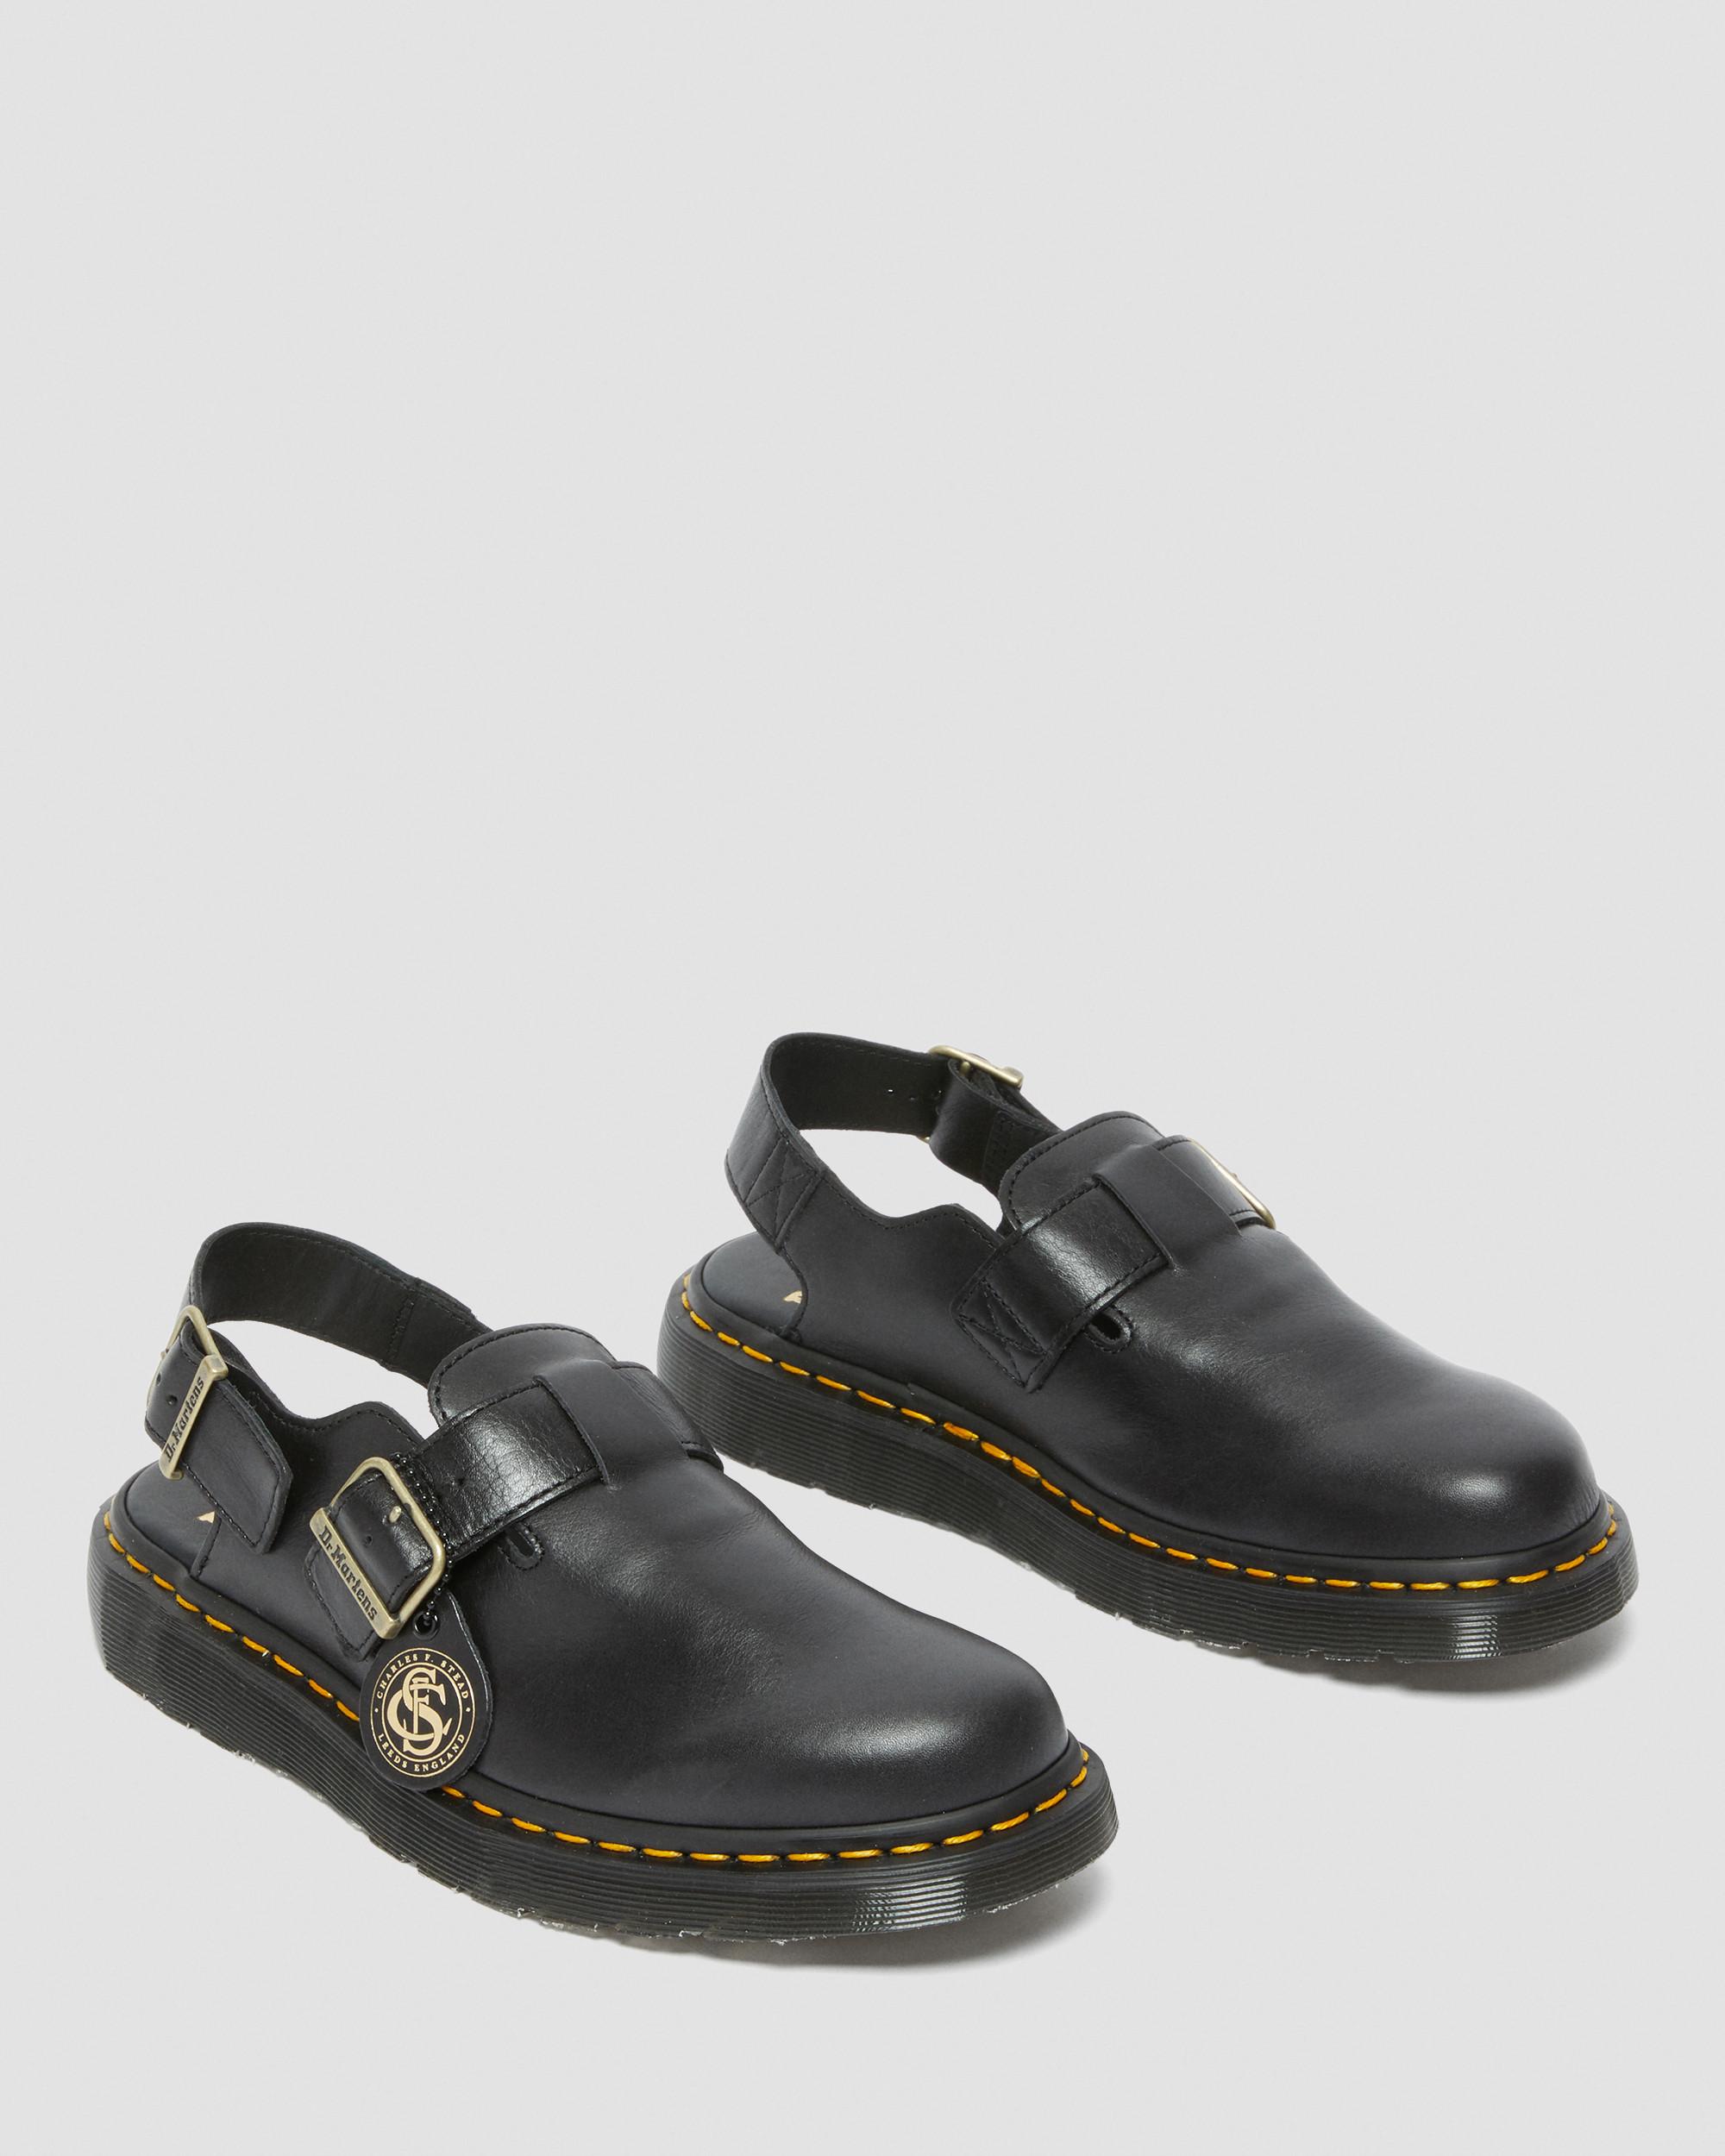 Jorge Made in England Leather Slingback SlidesJorge Made in England Leather Mules Dr. Martens